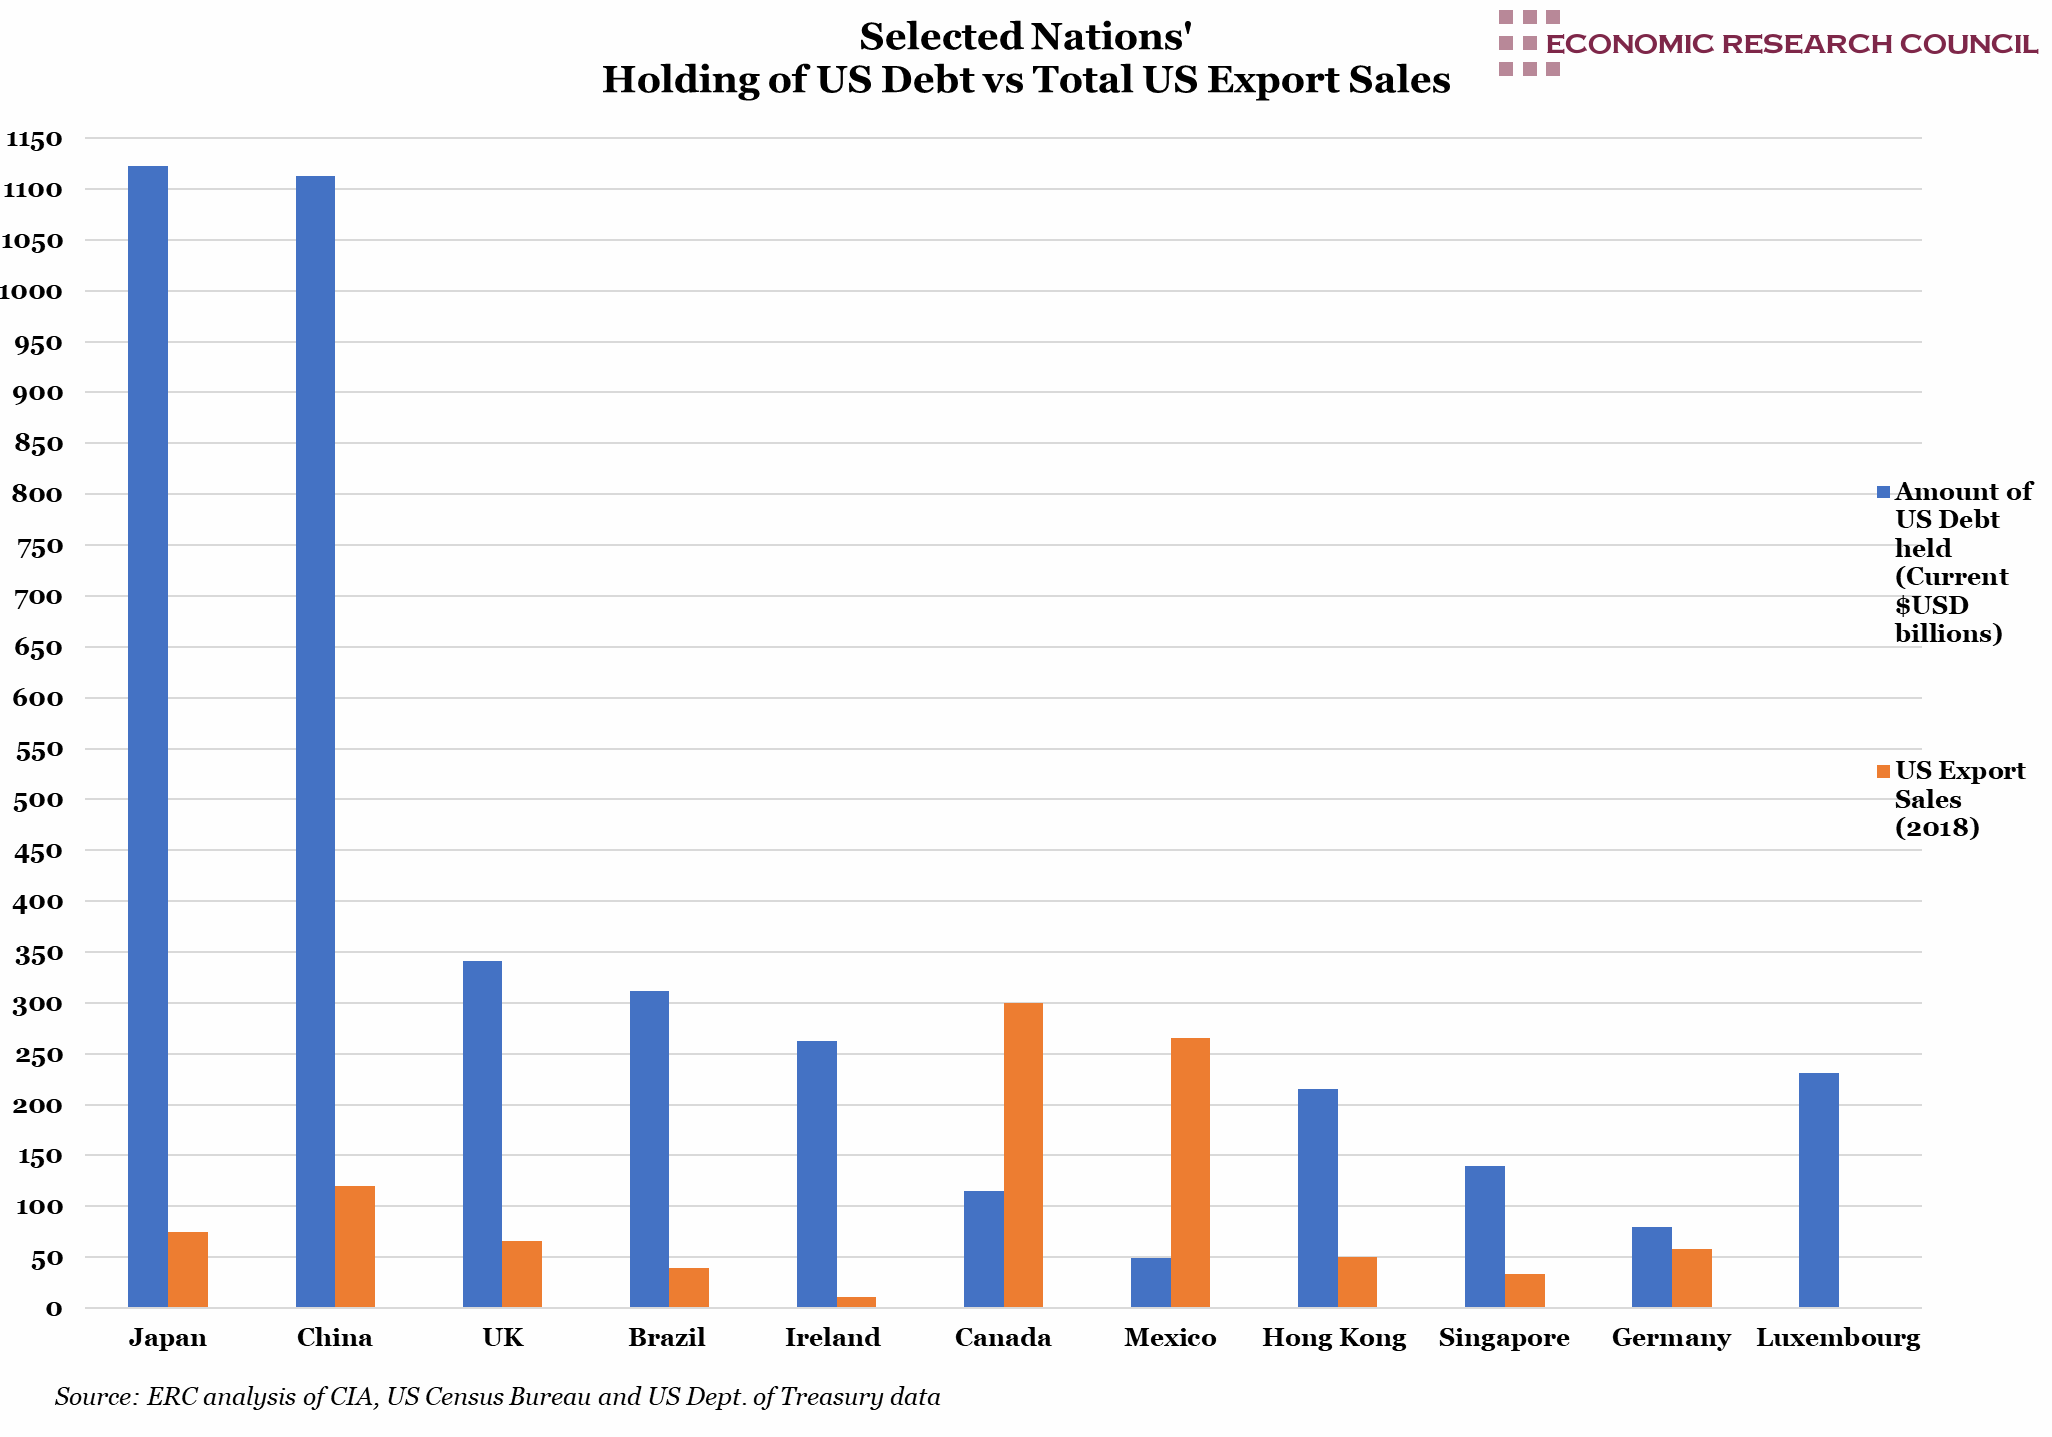 Selected Nations' Holding of US Debt vs Total US Export Sales